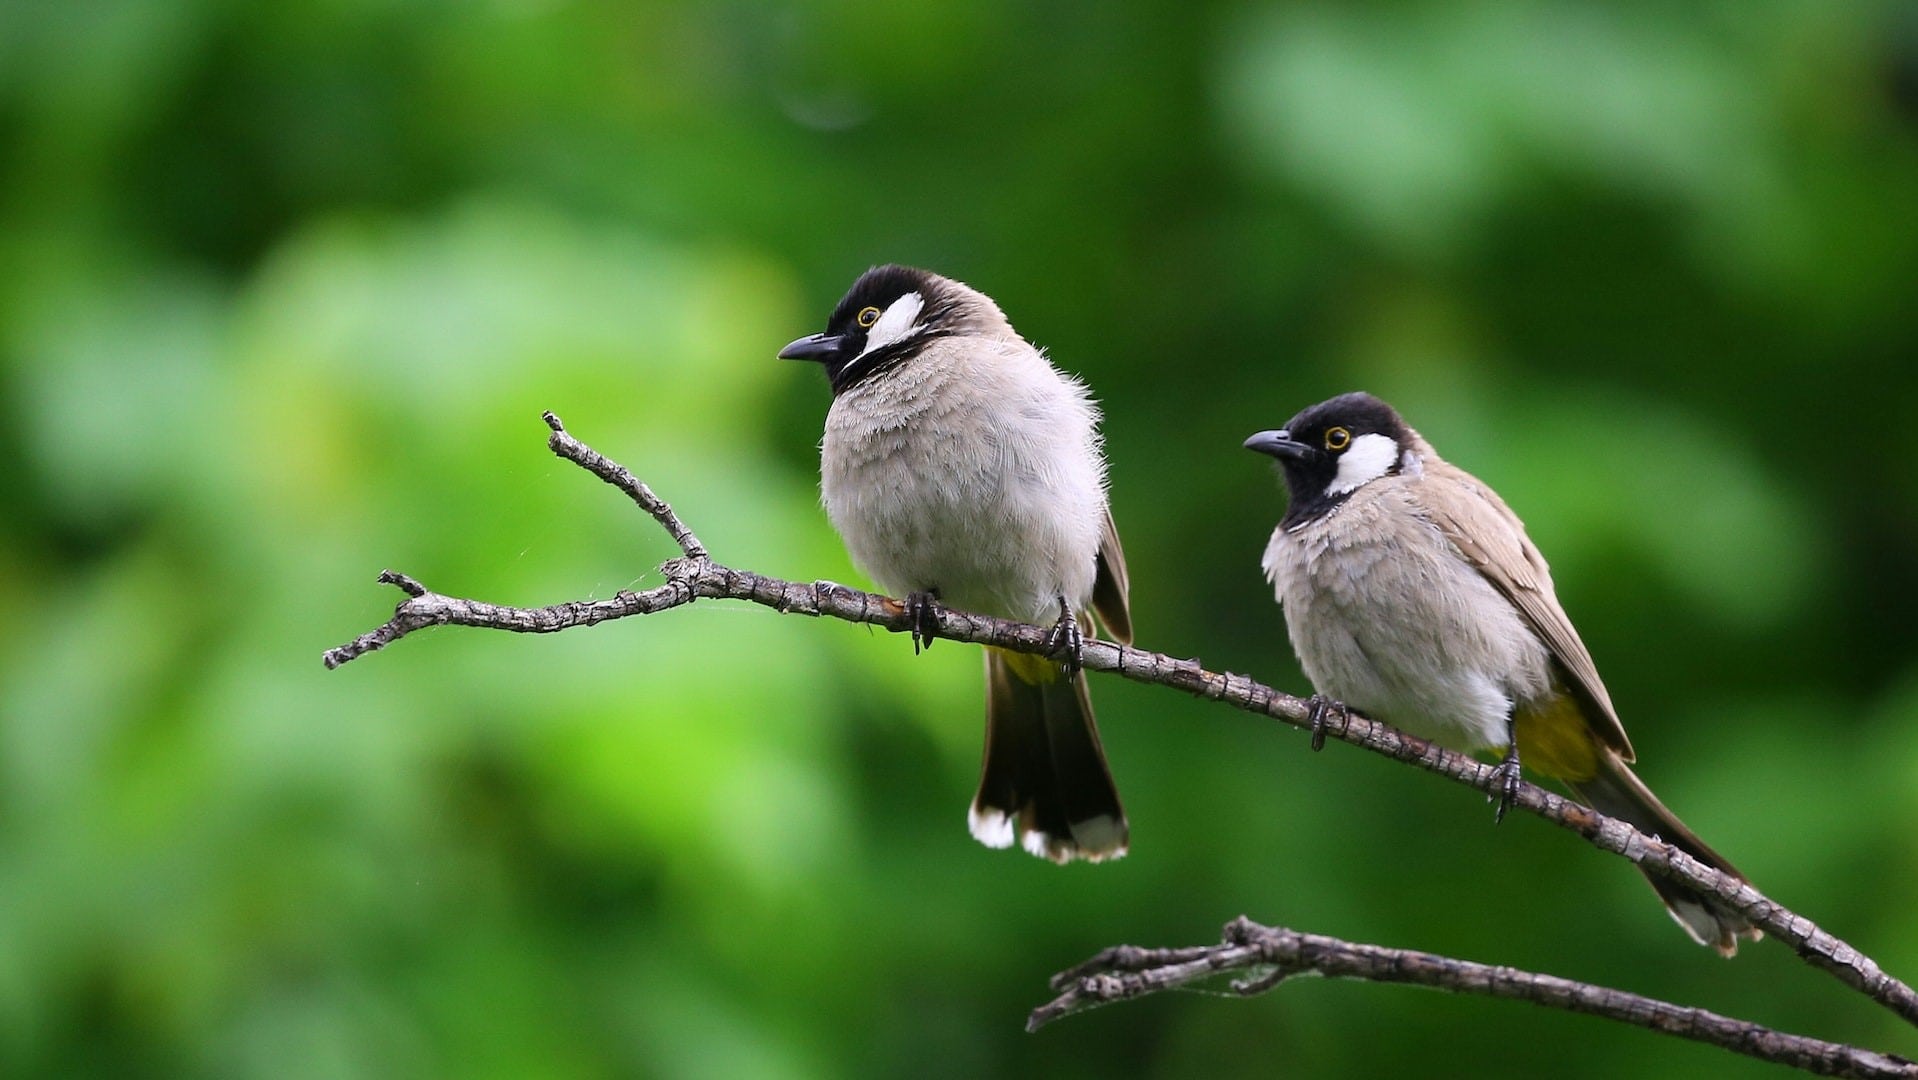 Two birds standing on a branch.